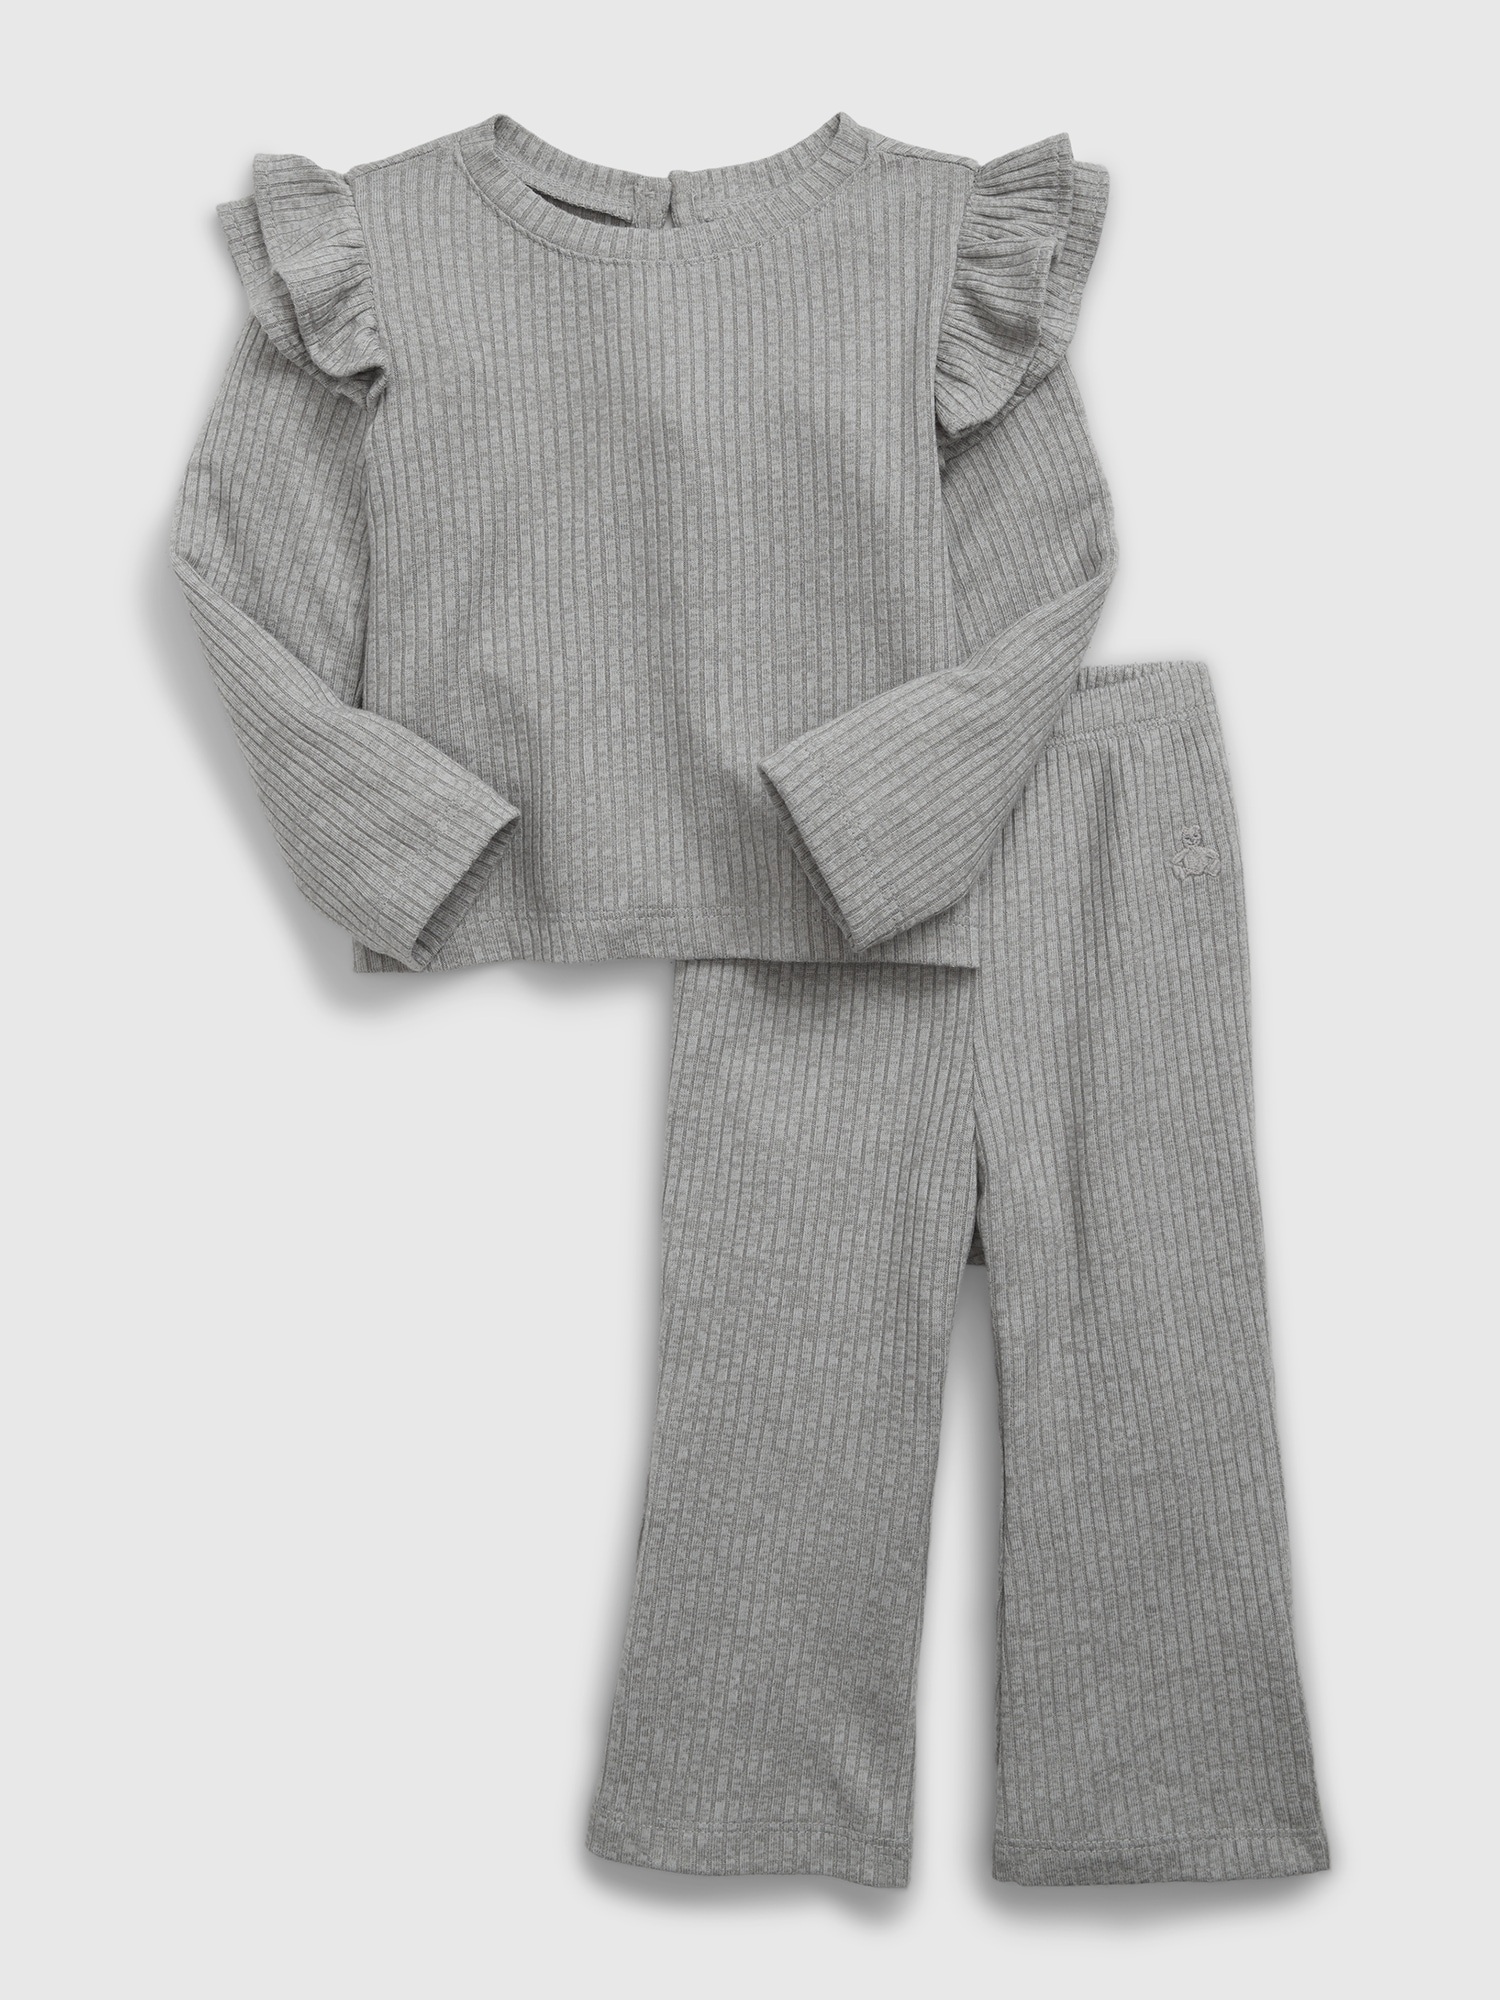 Baby Rib Two-Piece Outfit Set